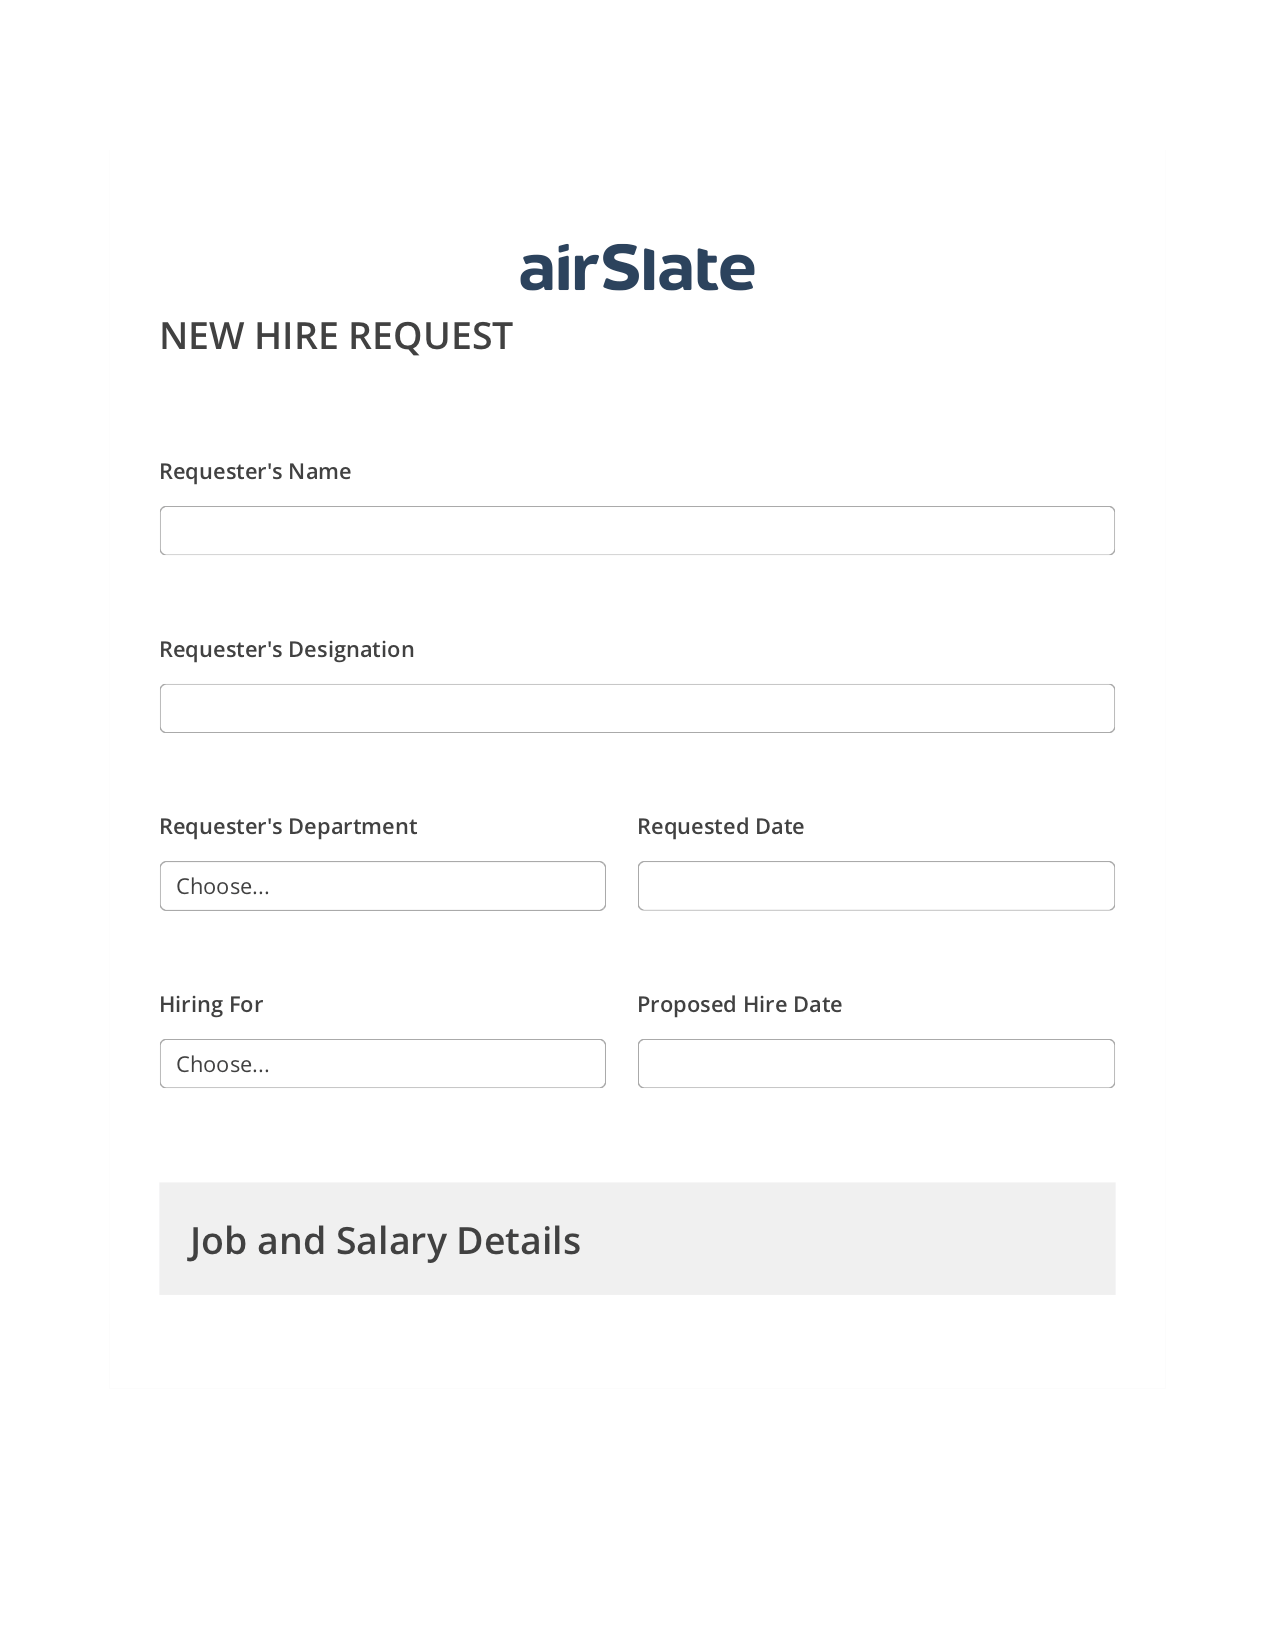 Hiring Request Workflow Pre-fill Document Bot, Create slate bot, Export to Excel 365 Bot